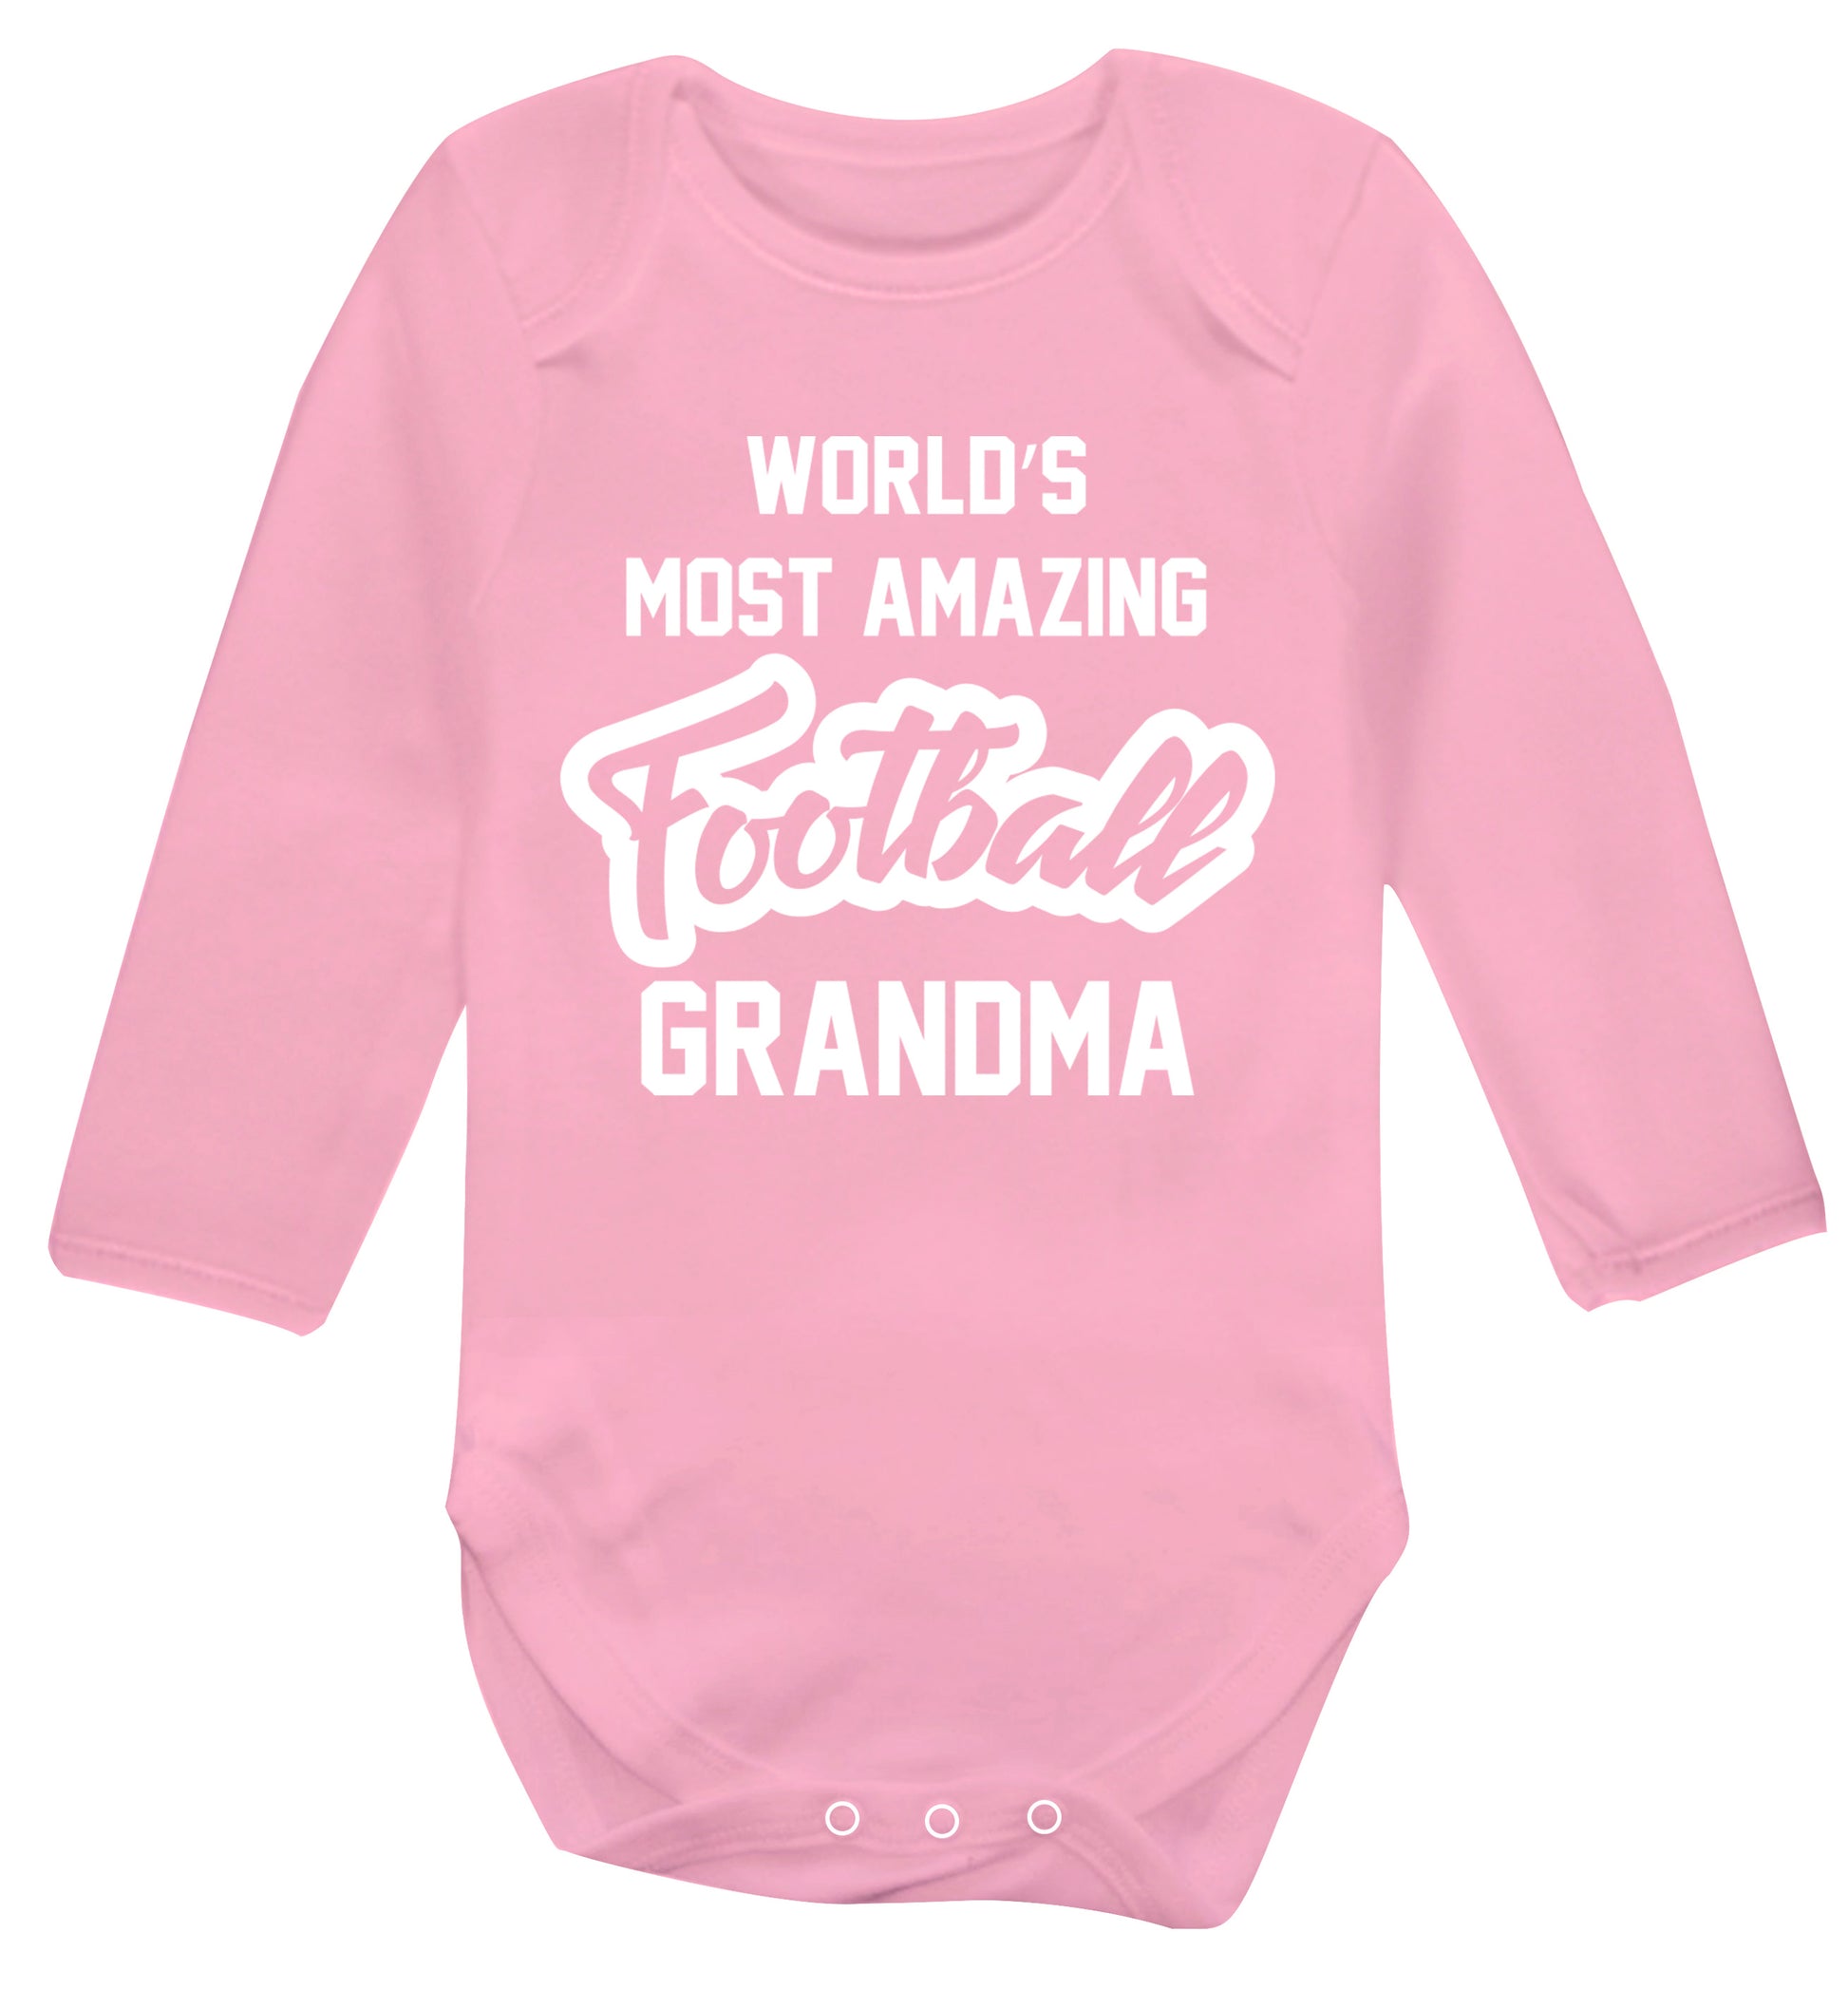 Worlds most amazing football grandma Baby Vest long sleeved pale pink 6-12 months